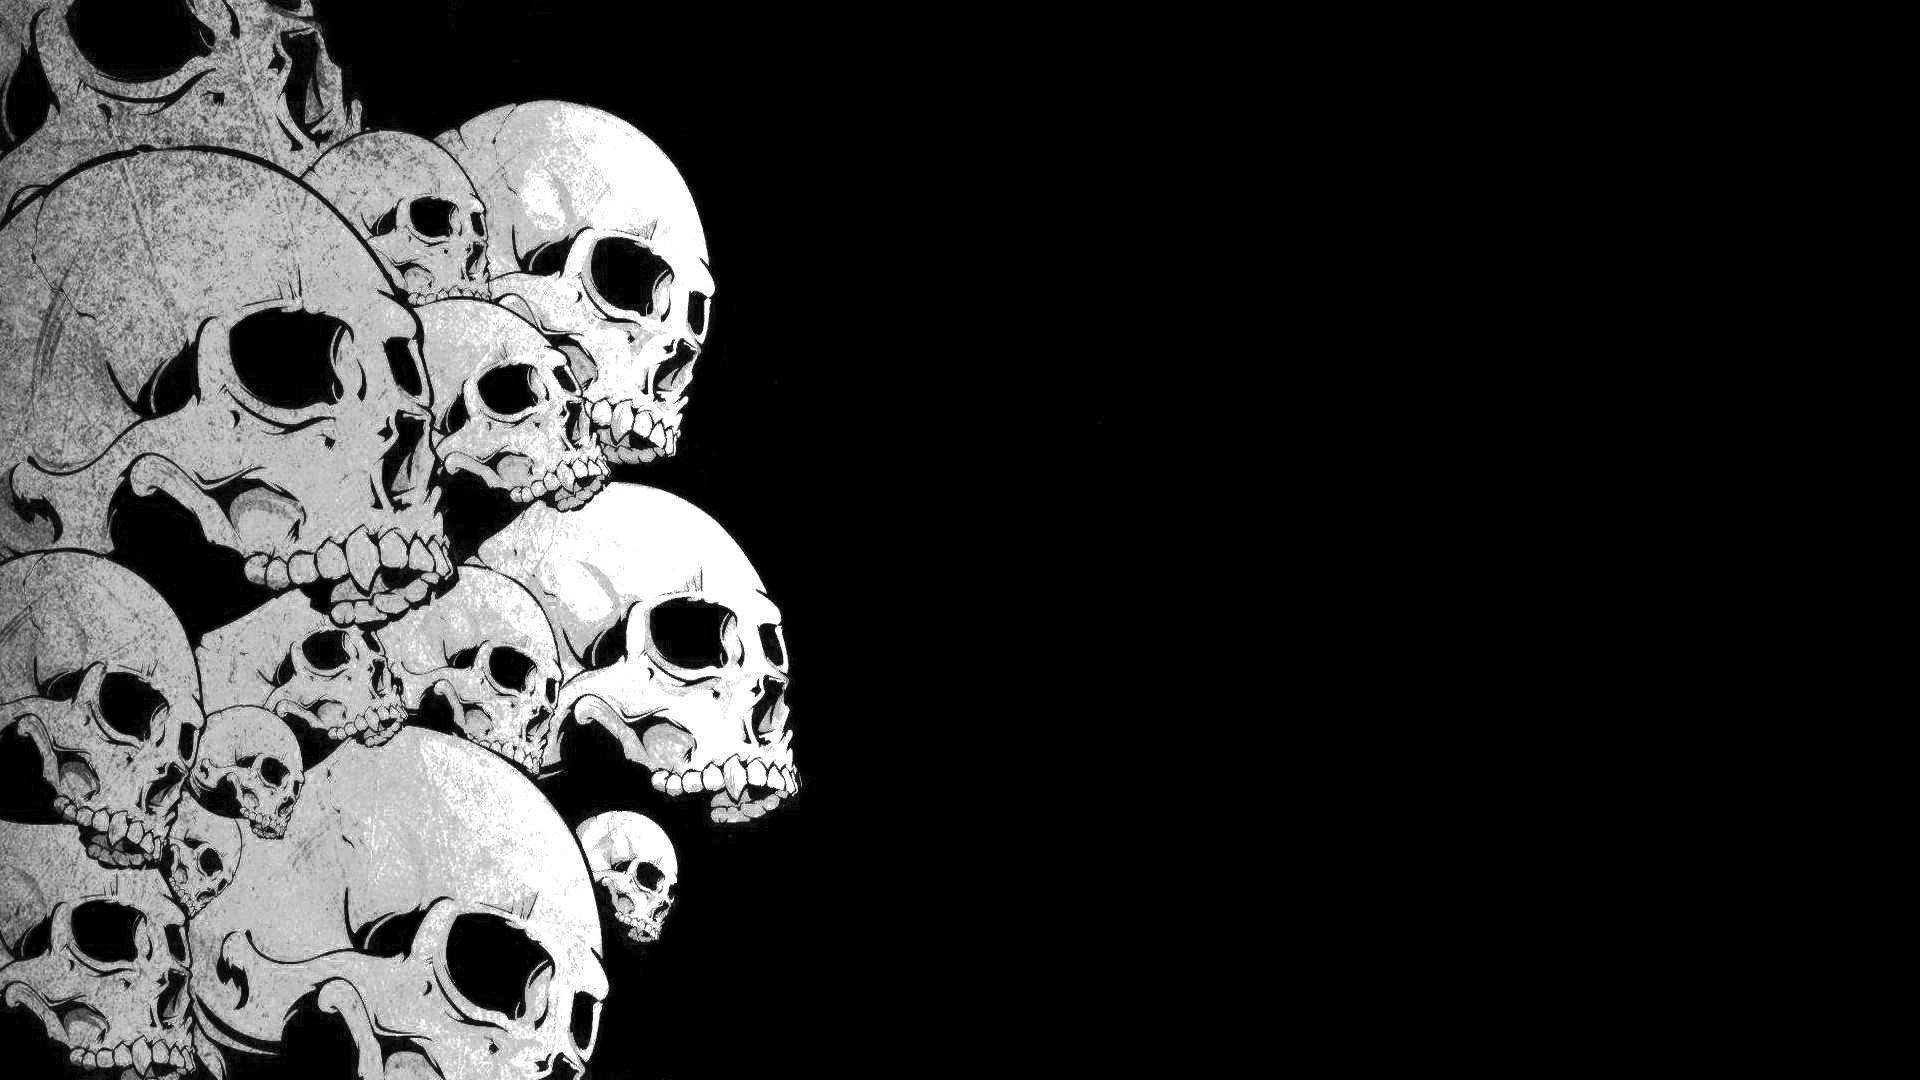 A skull to symbolize a haunting reminder of mortality Wallpaper